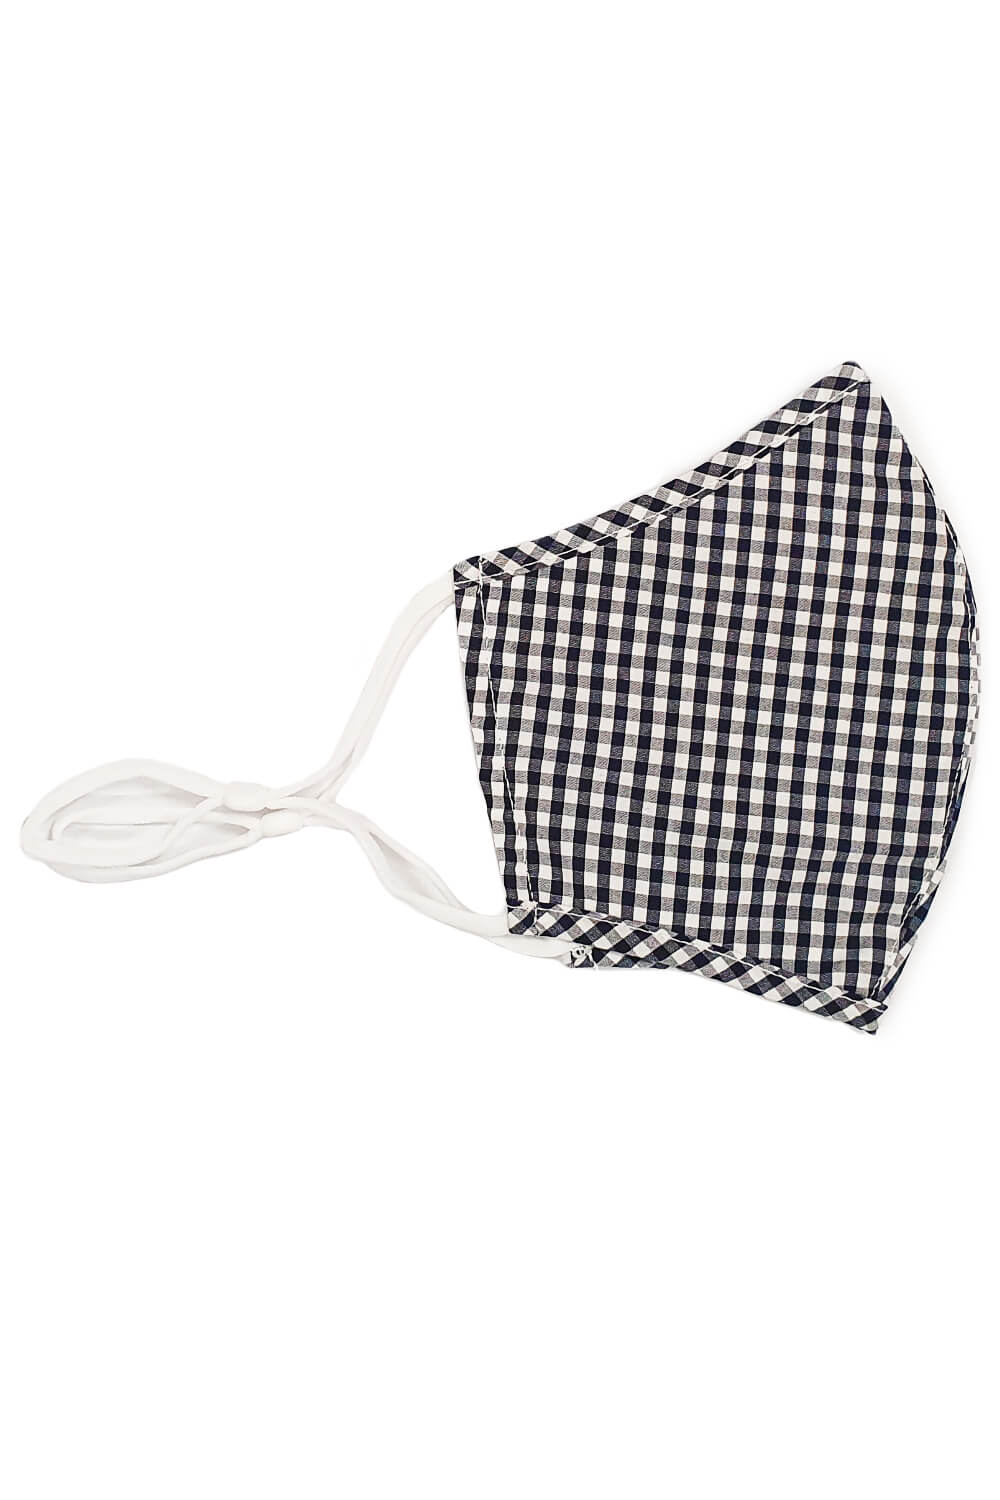 Gingham Check Fast Drying Fashion Face Mask